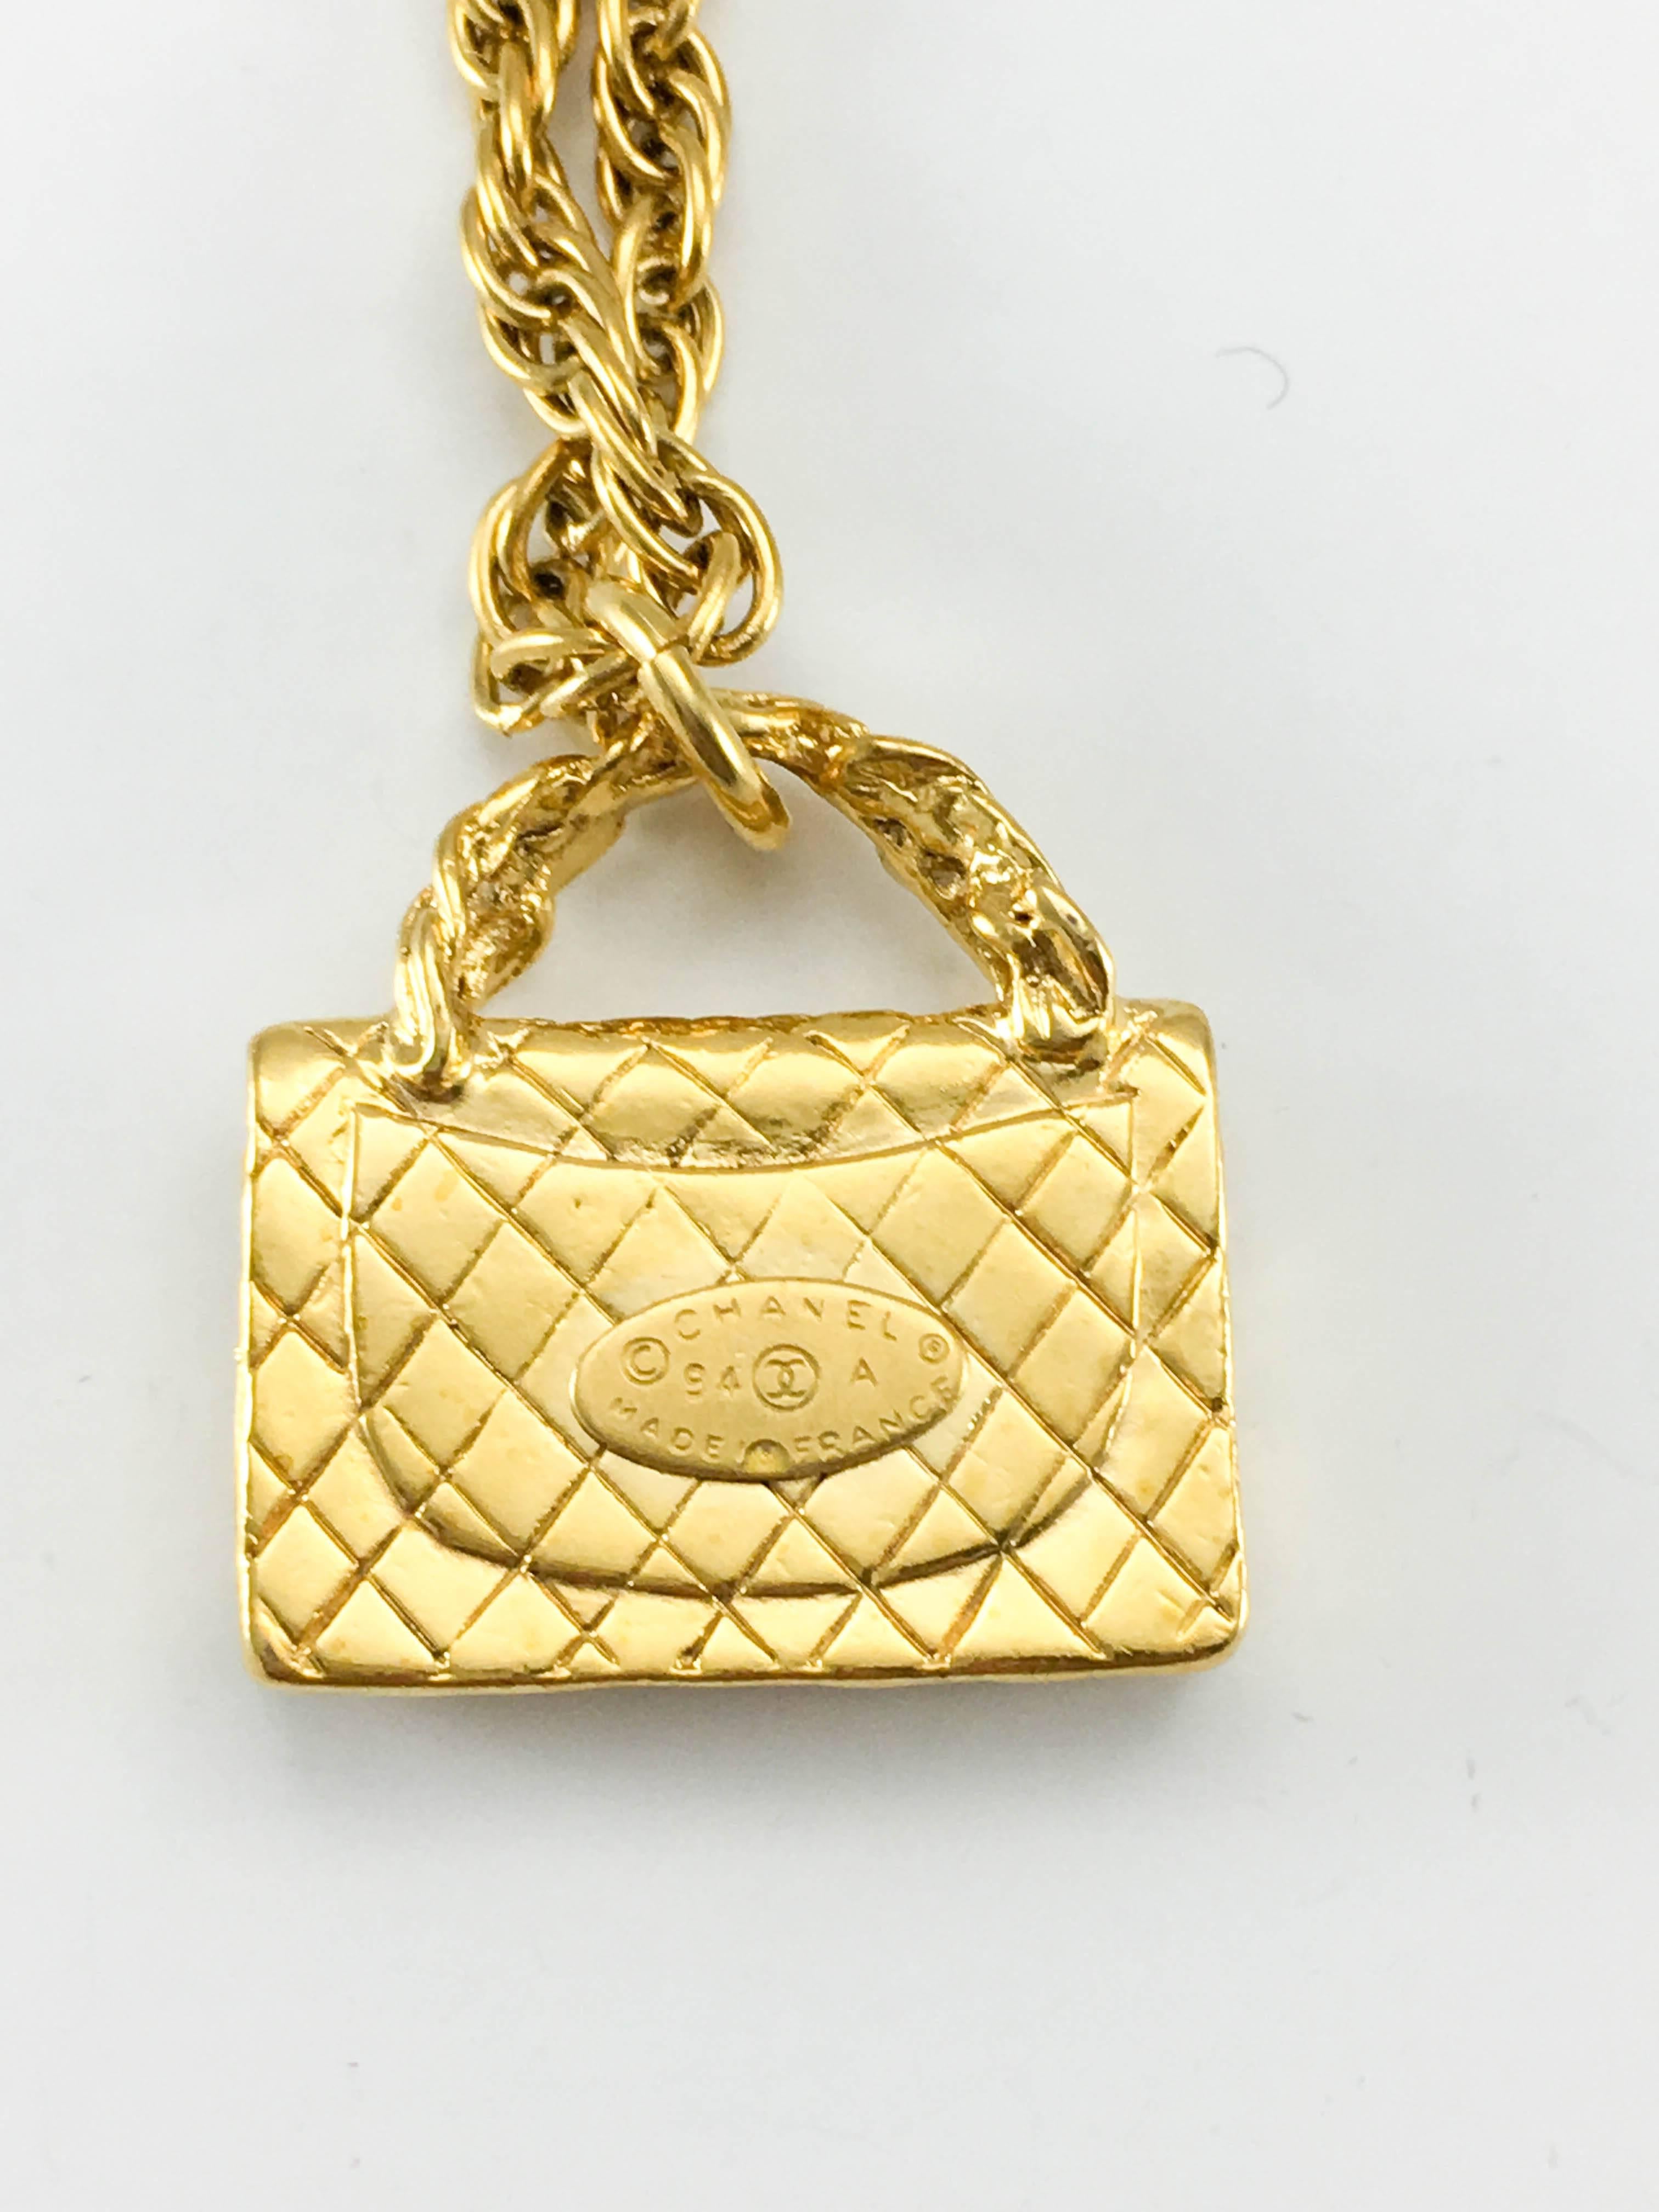 1994 Chanel Gold-Plated 2.55 Quilted Handbag Pendant Necklace For Sale 2